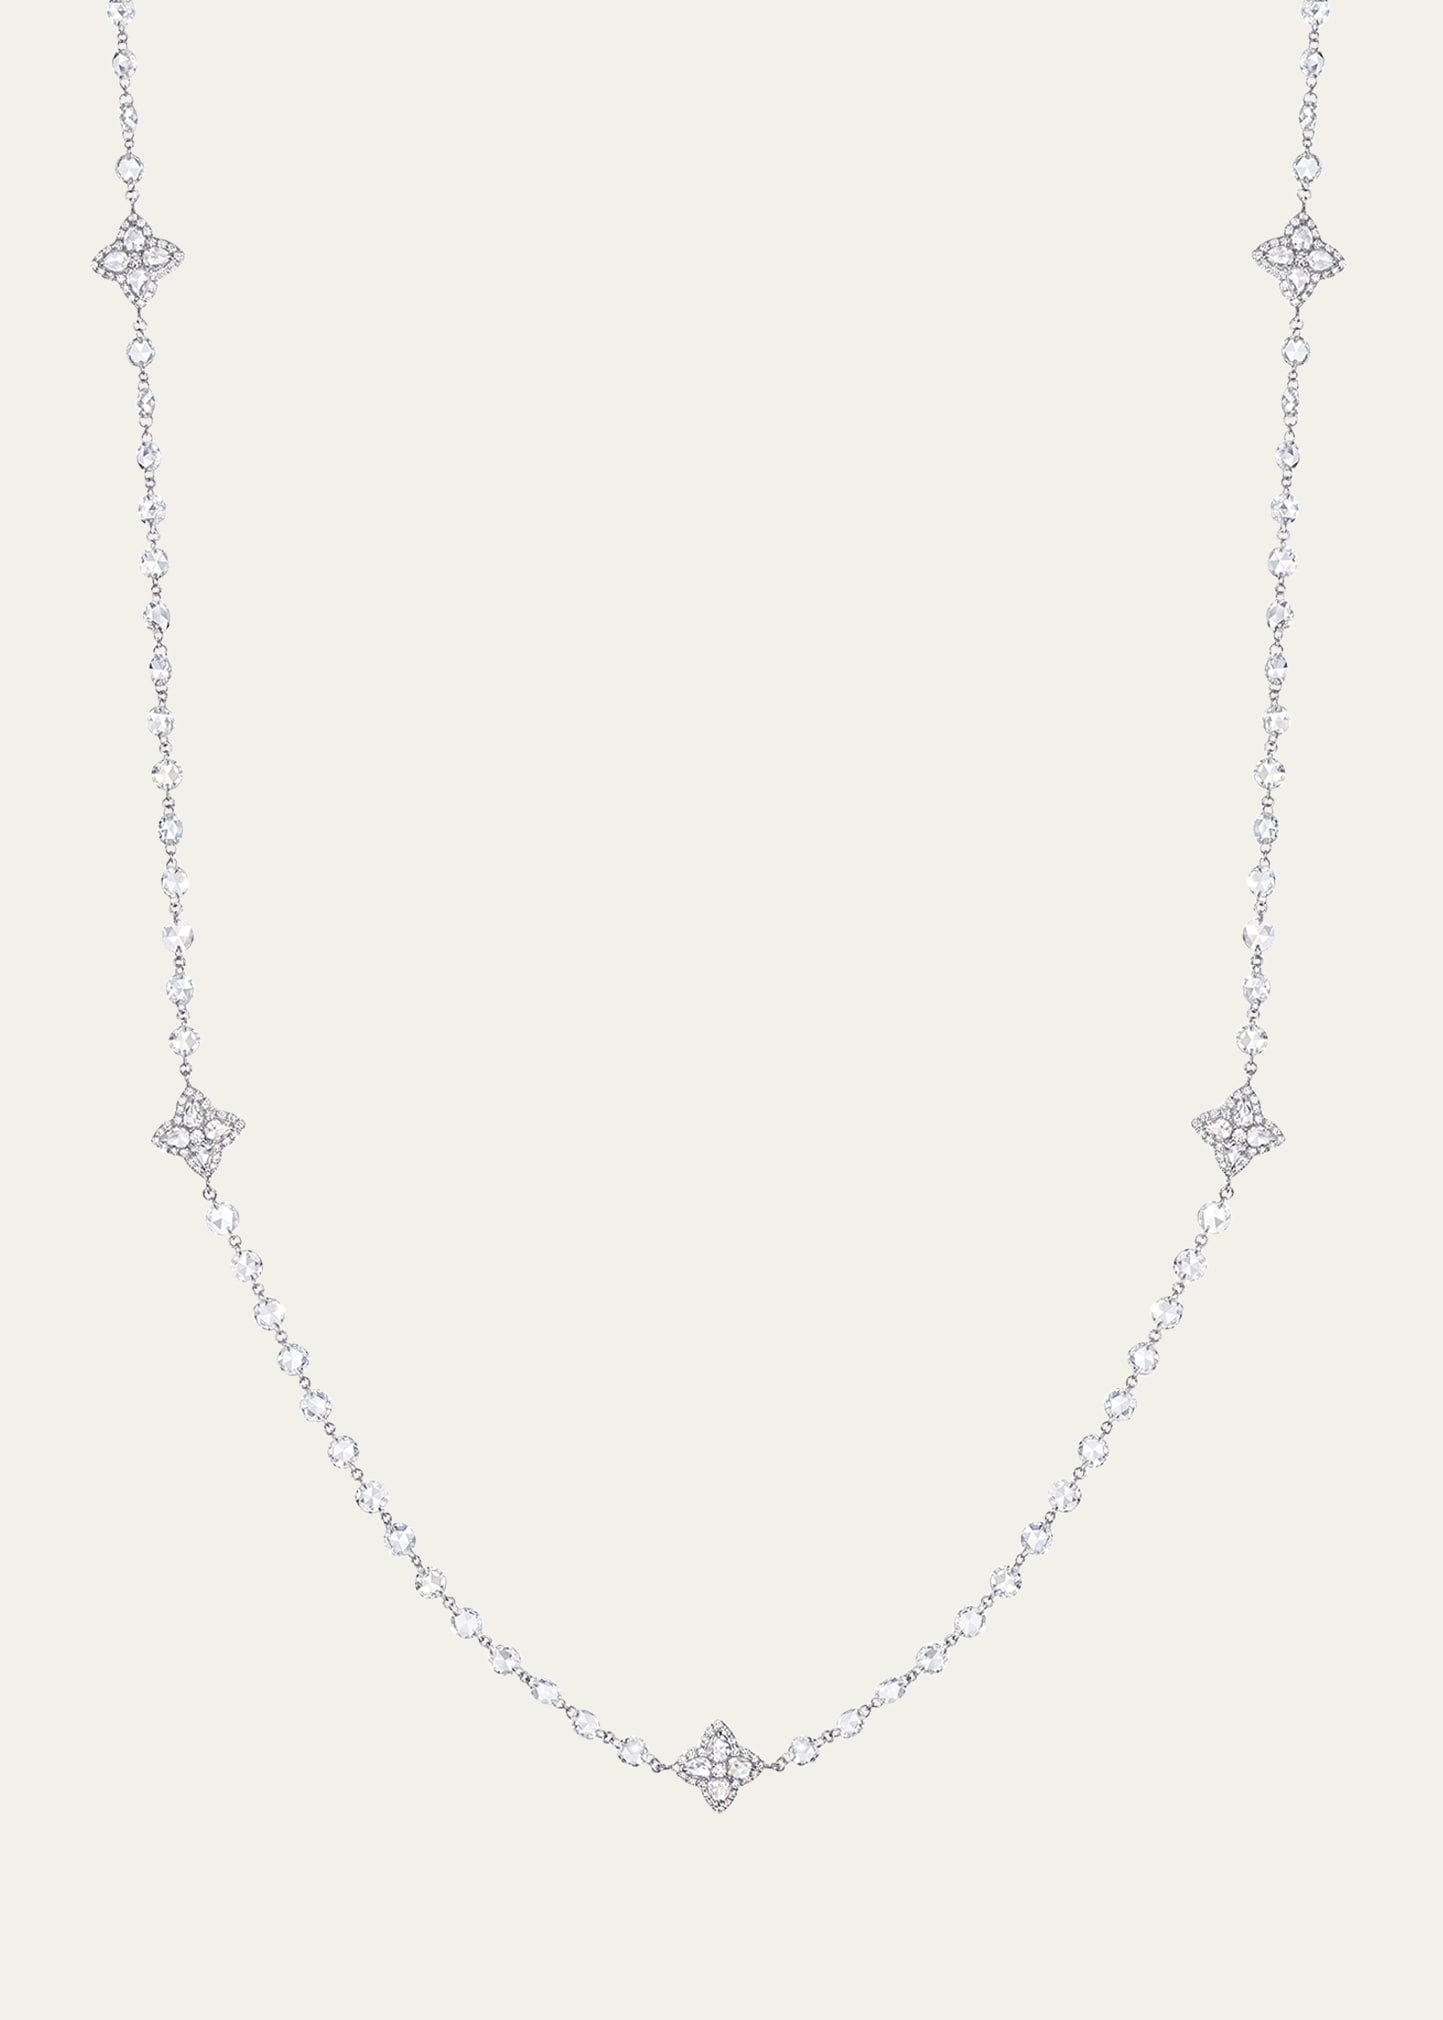 64 Facets 18k White Gold Necklace With Blossom Diamond Stations, 32"l In Metallic